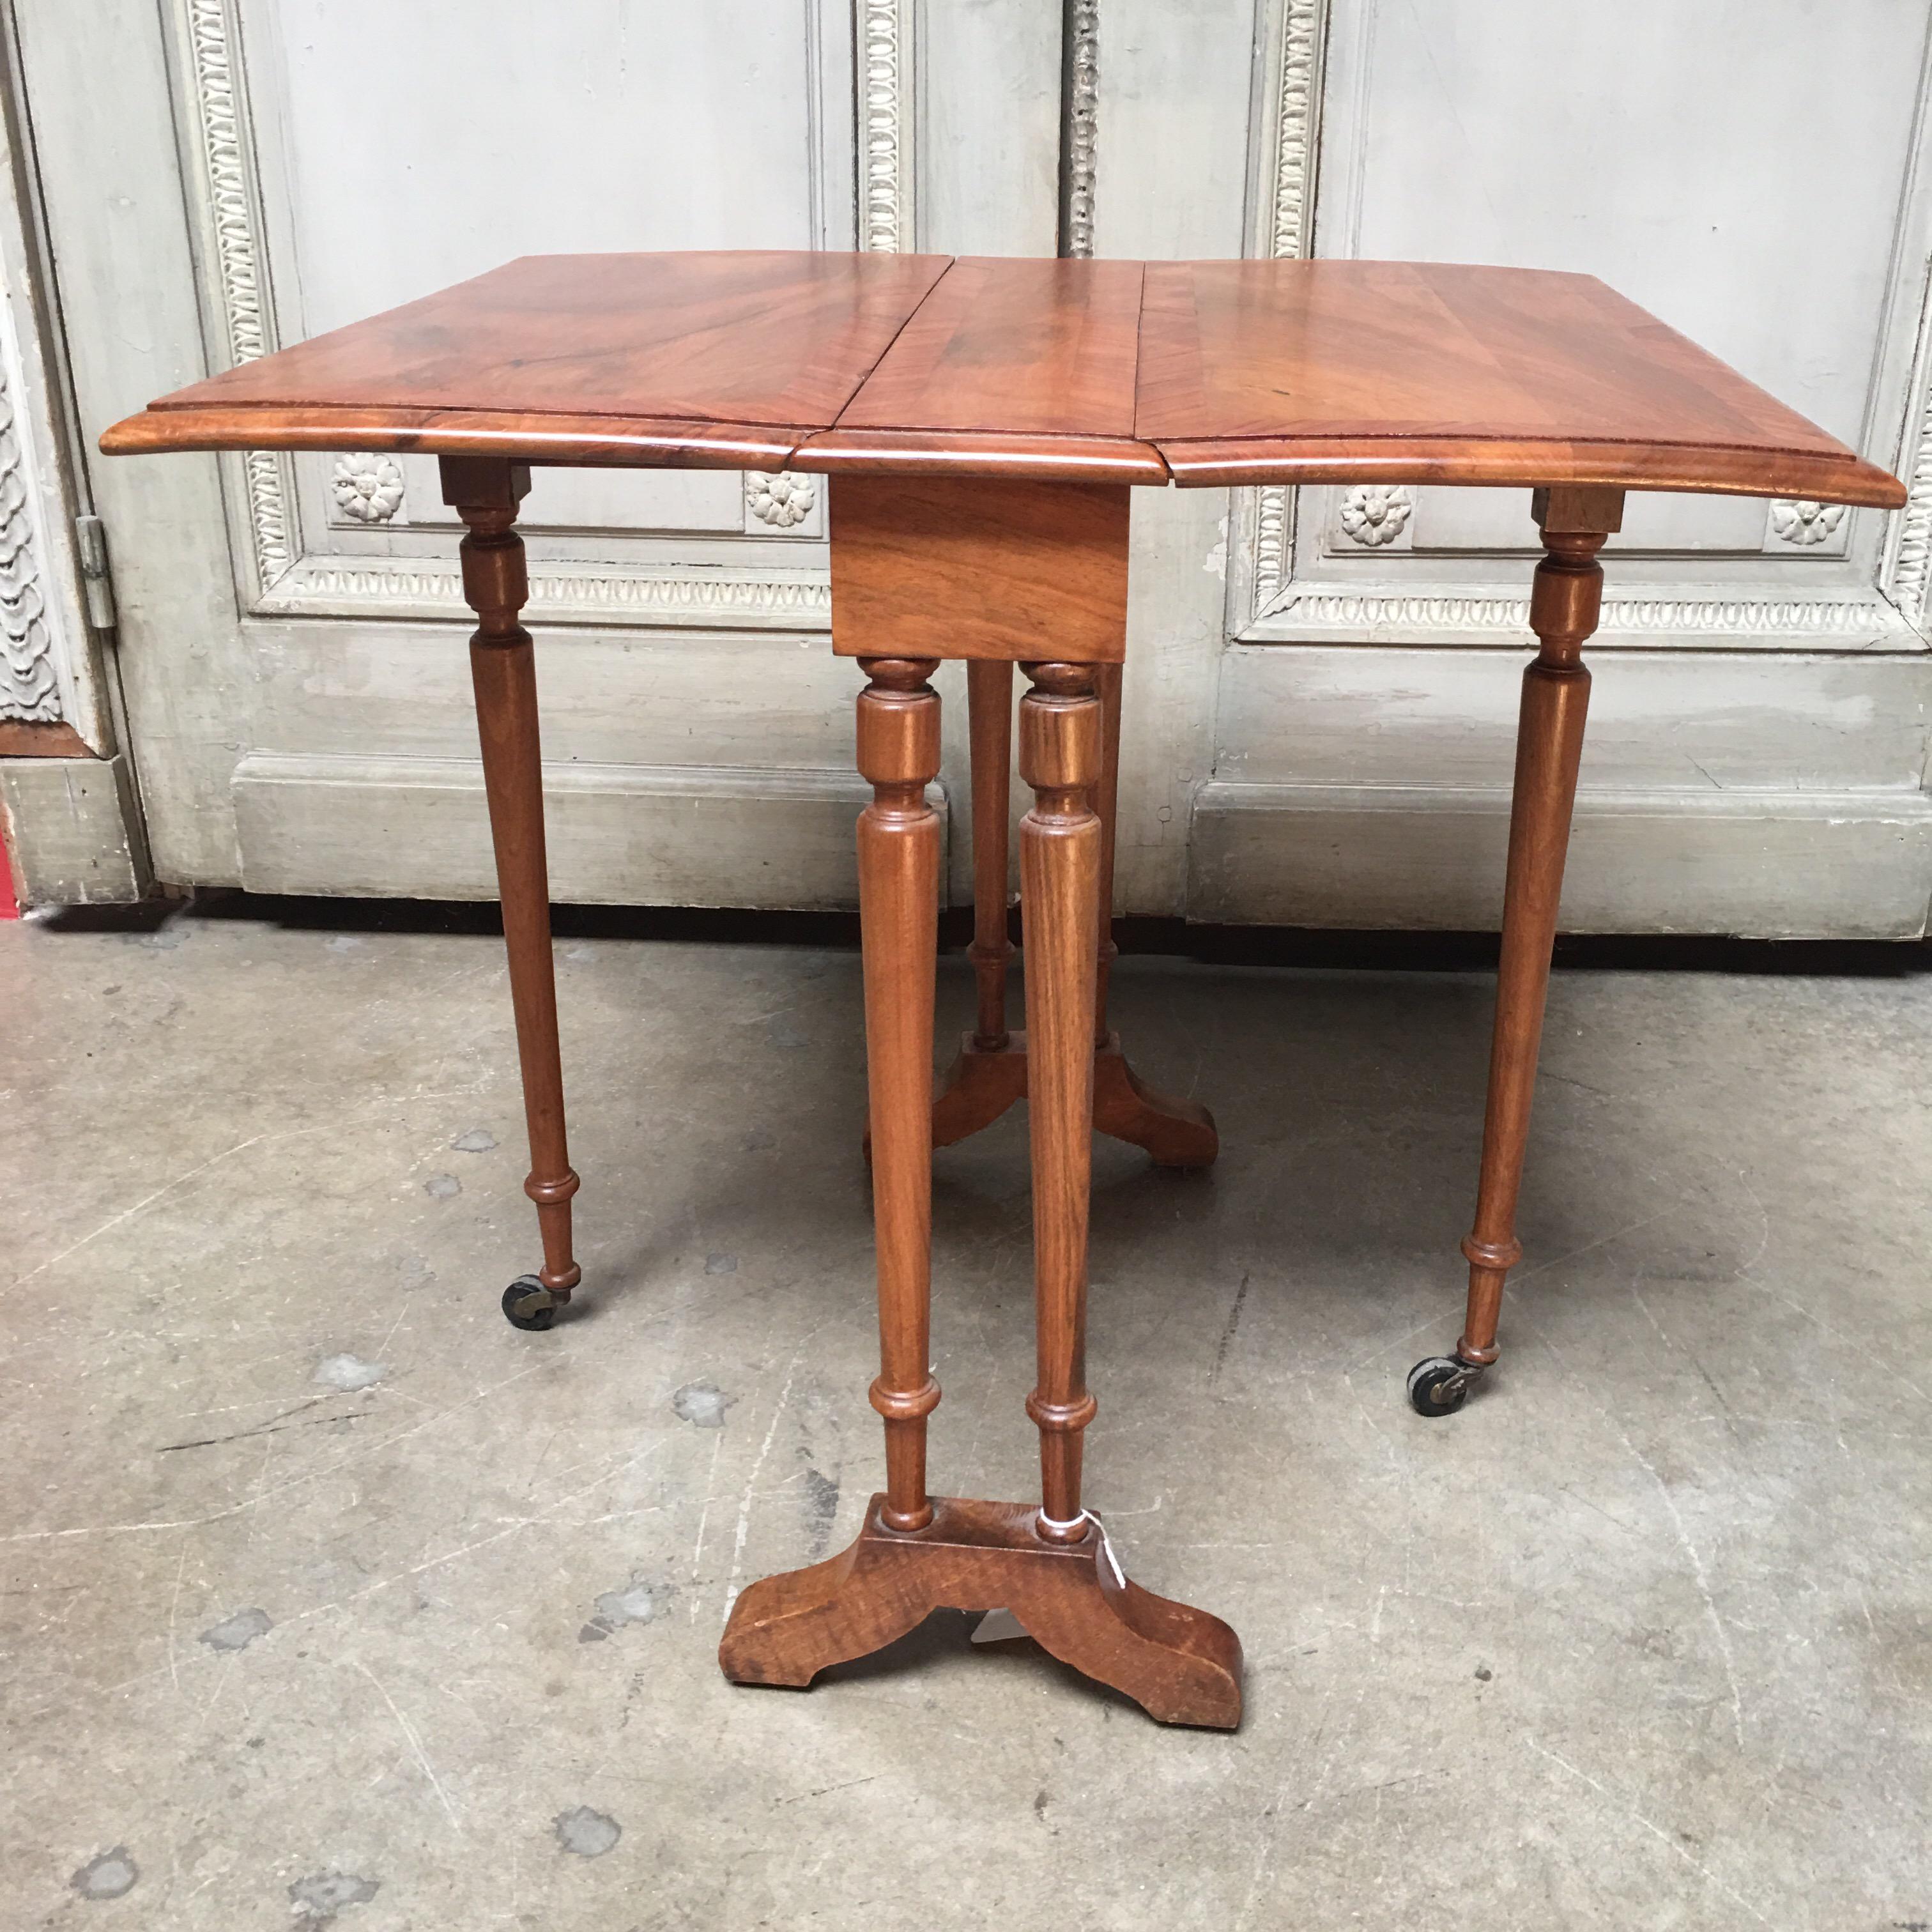 A small scale 19th century English Sutherland table with lovely walnut and kingwood veneer, two drop leaves, supported by turned shaped column ends, turned swing out leg, original castors


